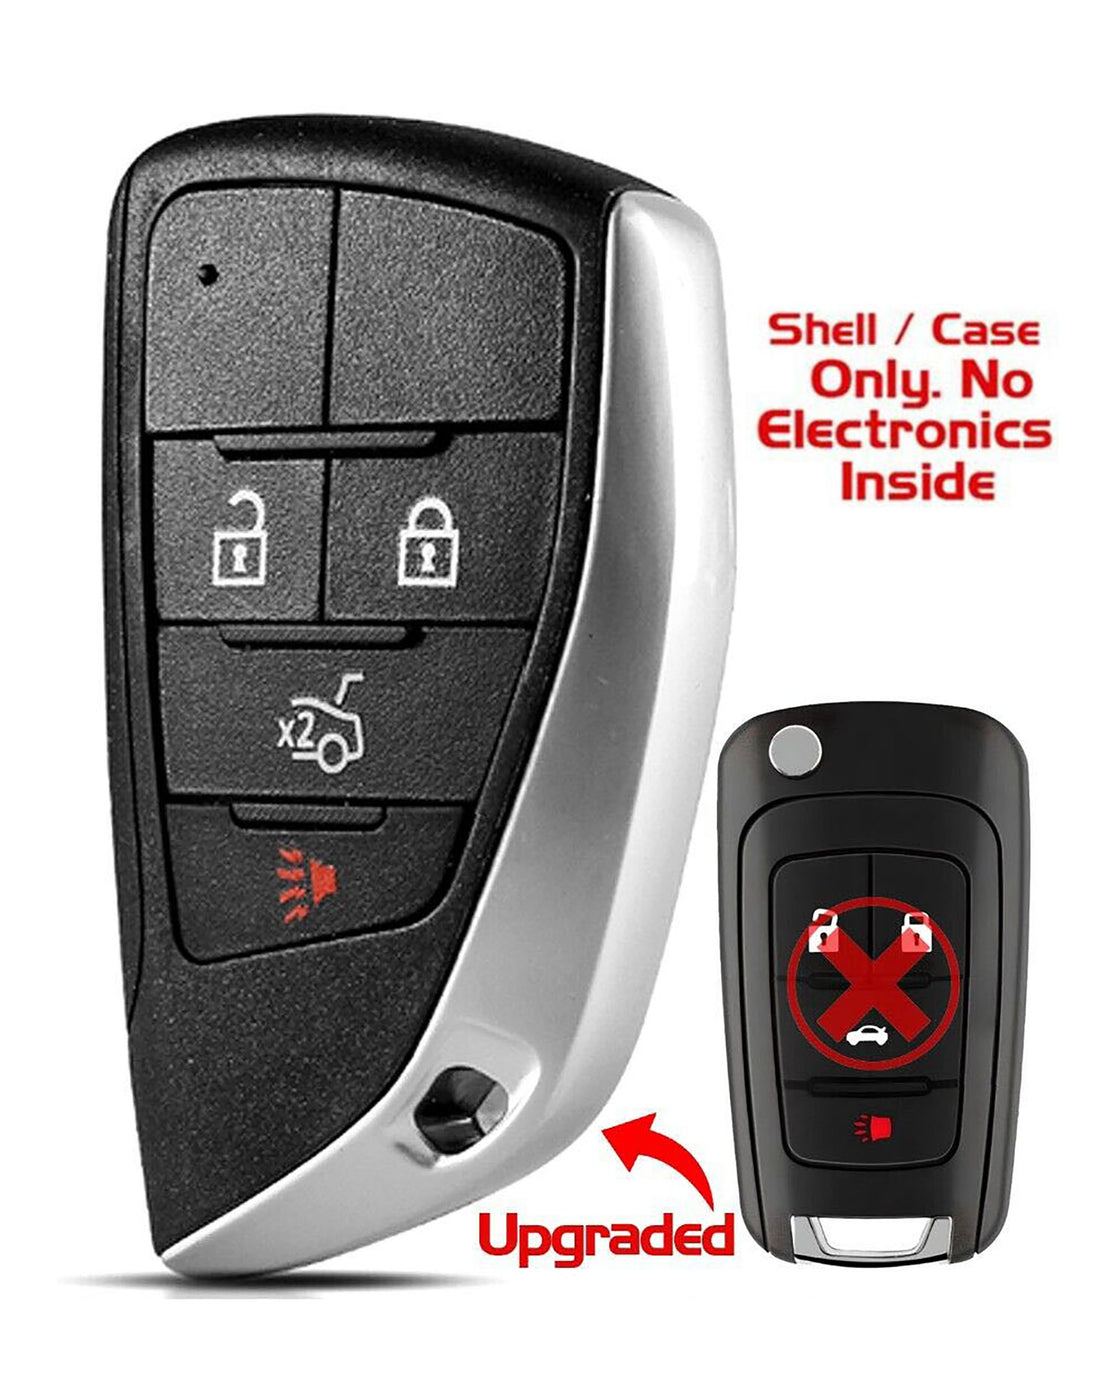 1x New Quality Replacement Key Fob Remote SHELL / CASE Compatible with & Fit For Buick & Chevrolet - MPN KR55WK50073-M-08 (NO electronics or Chip inside)